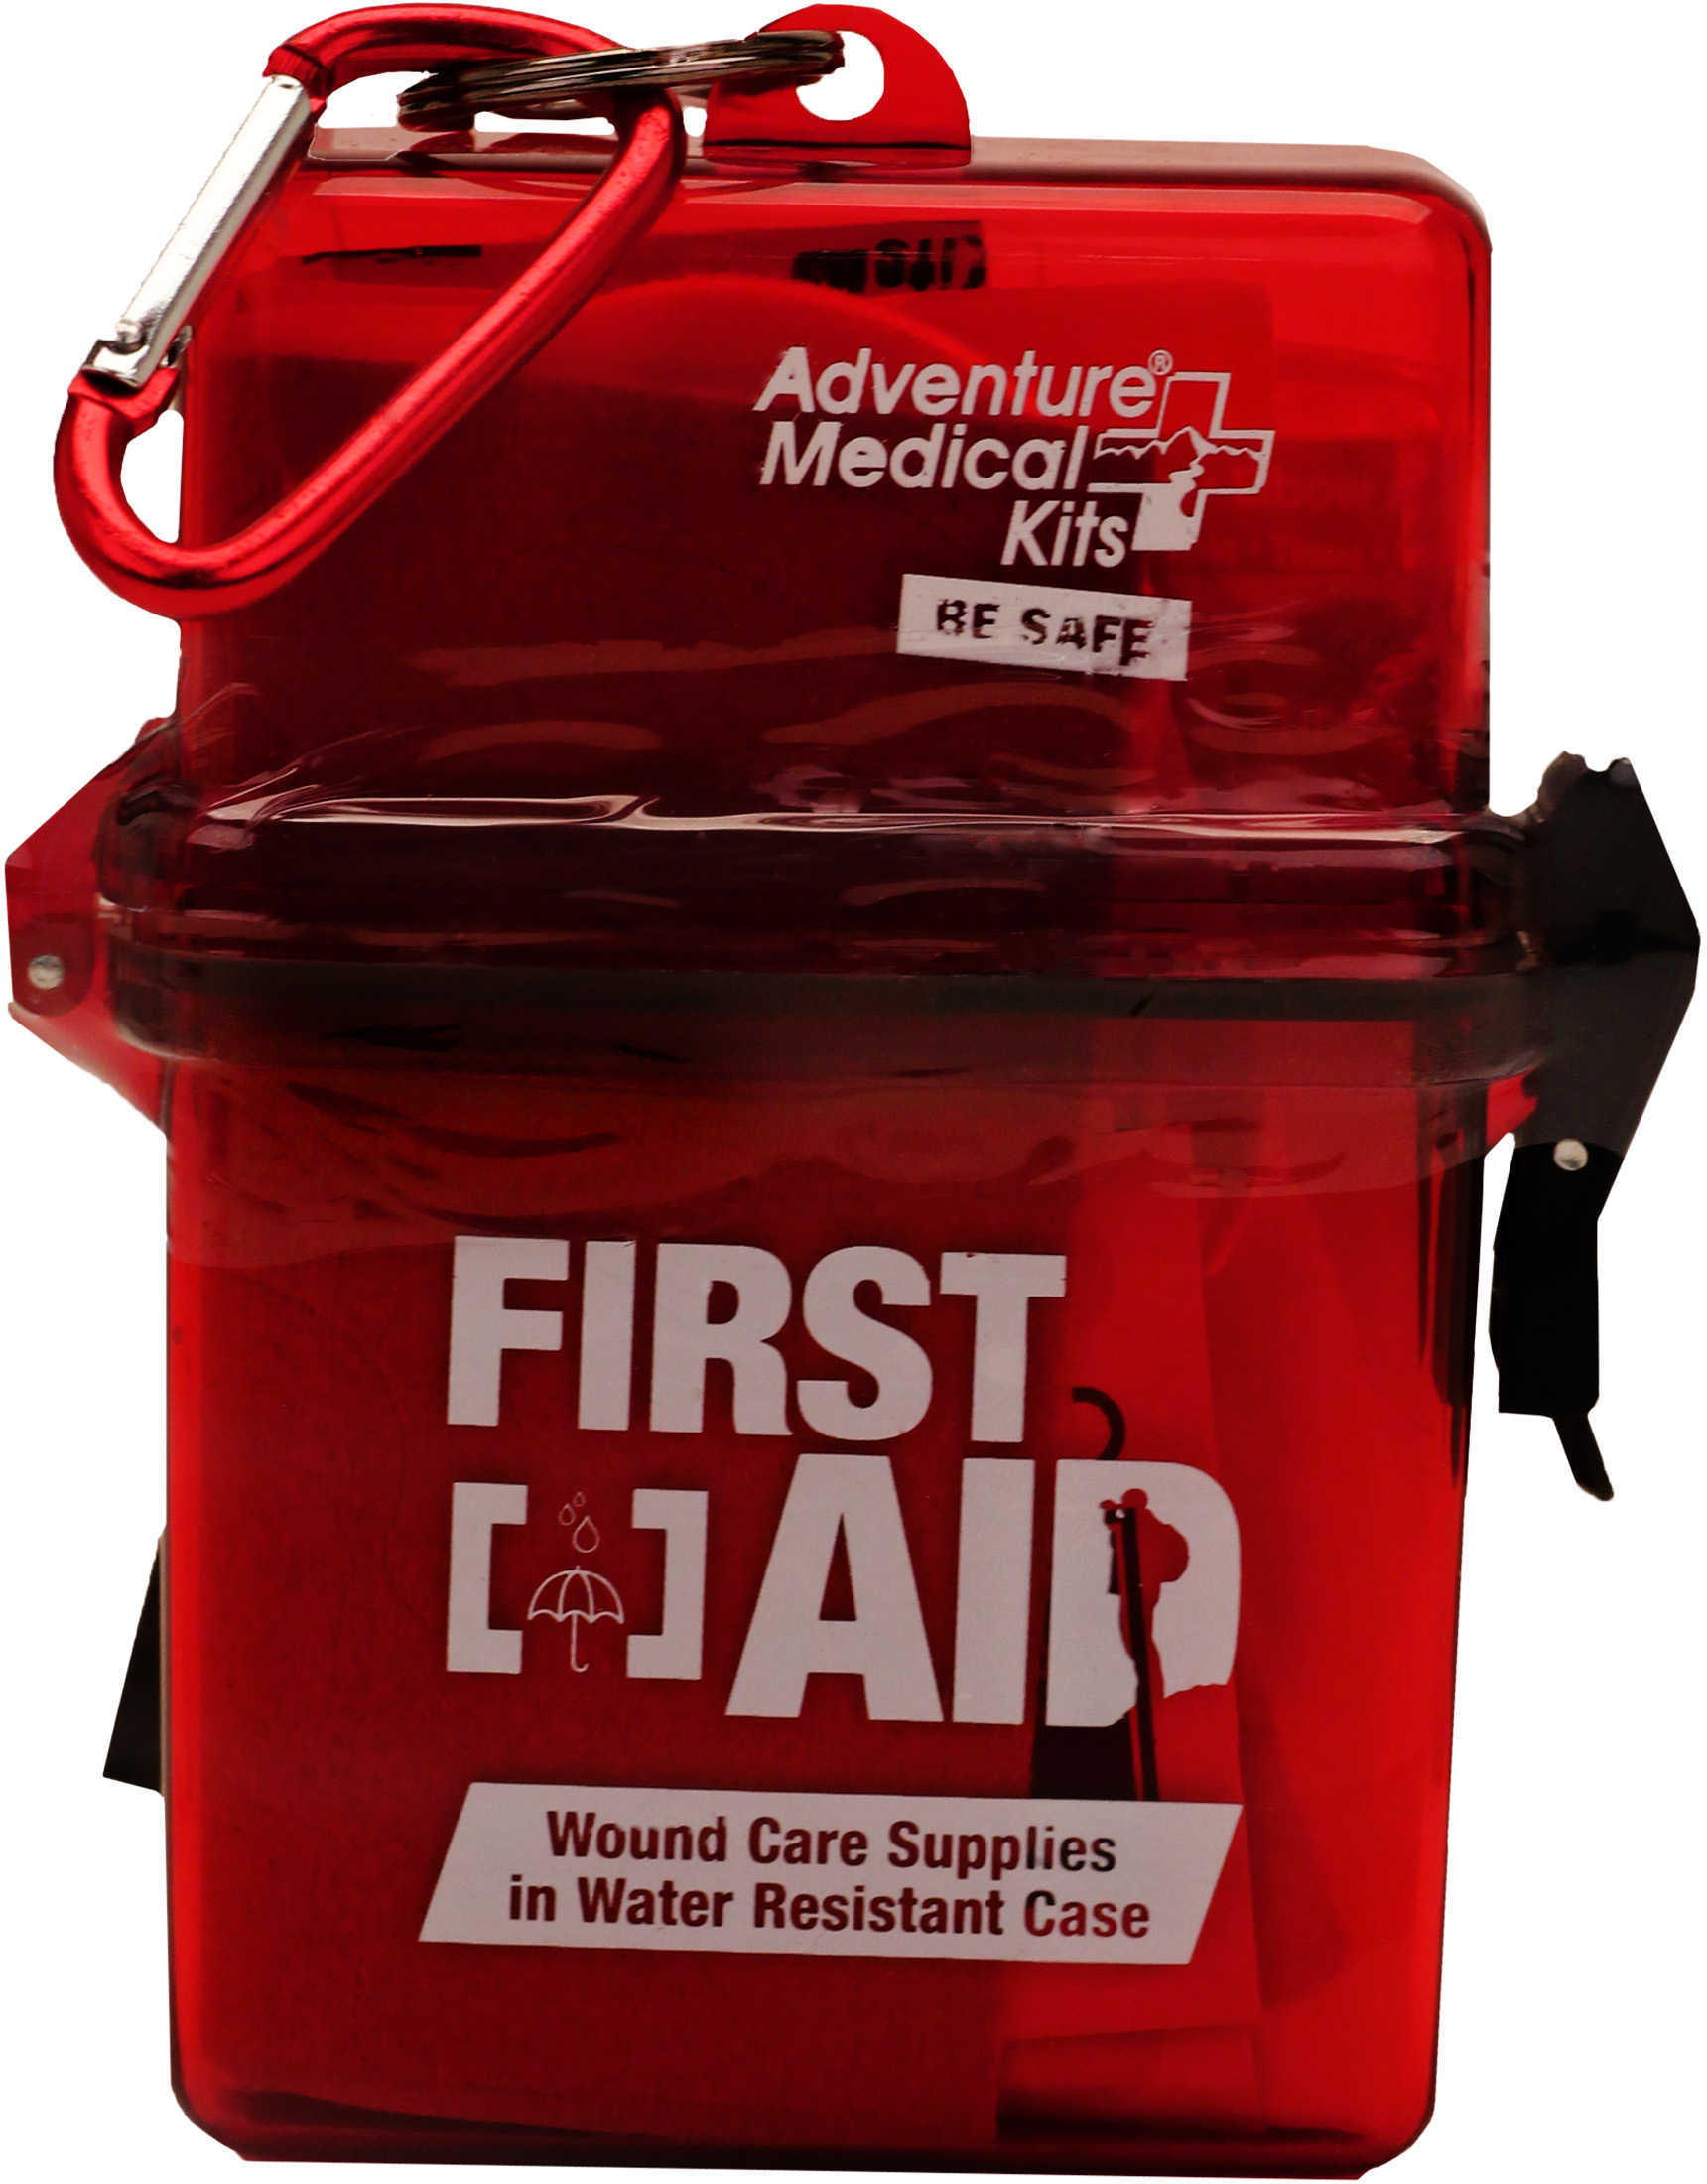 AMK Adventure First Aid Kit Water Resistant 3 Oz 1-2 PPL